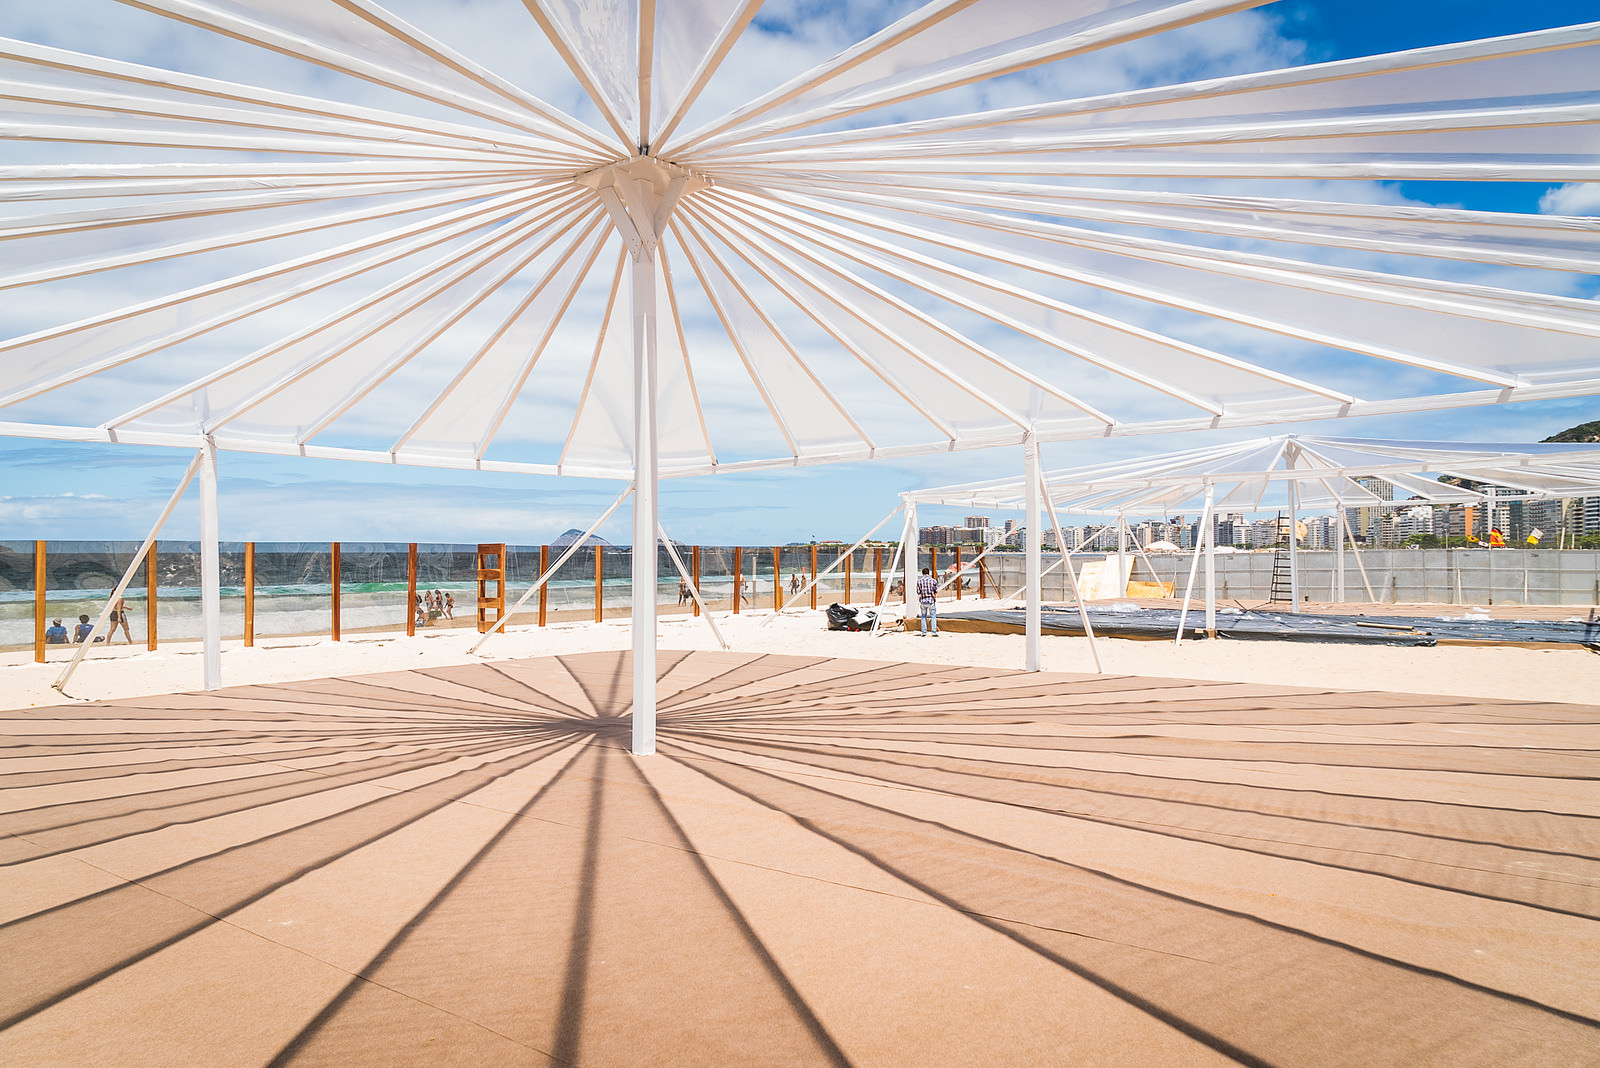 An event tent with a view of the ocean. Photo: James Duncan Davidson